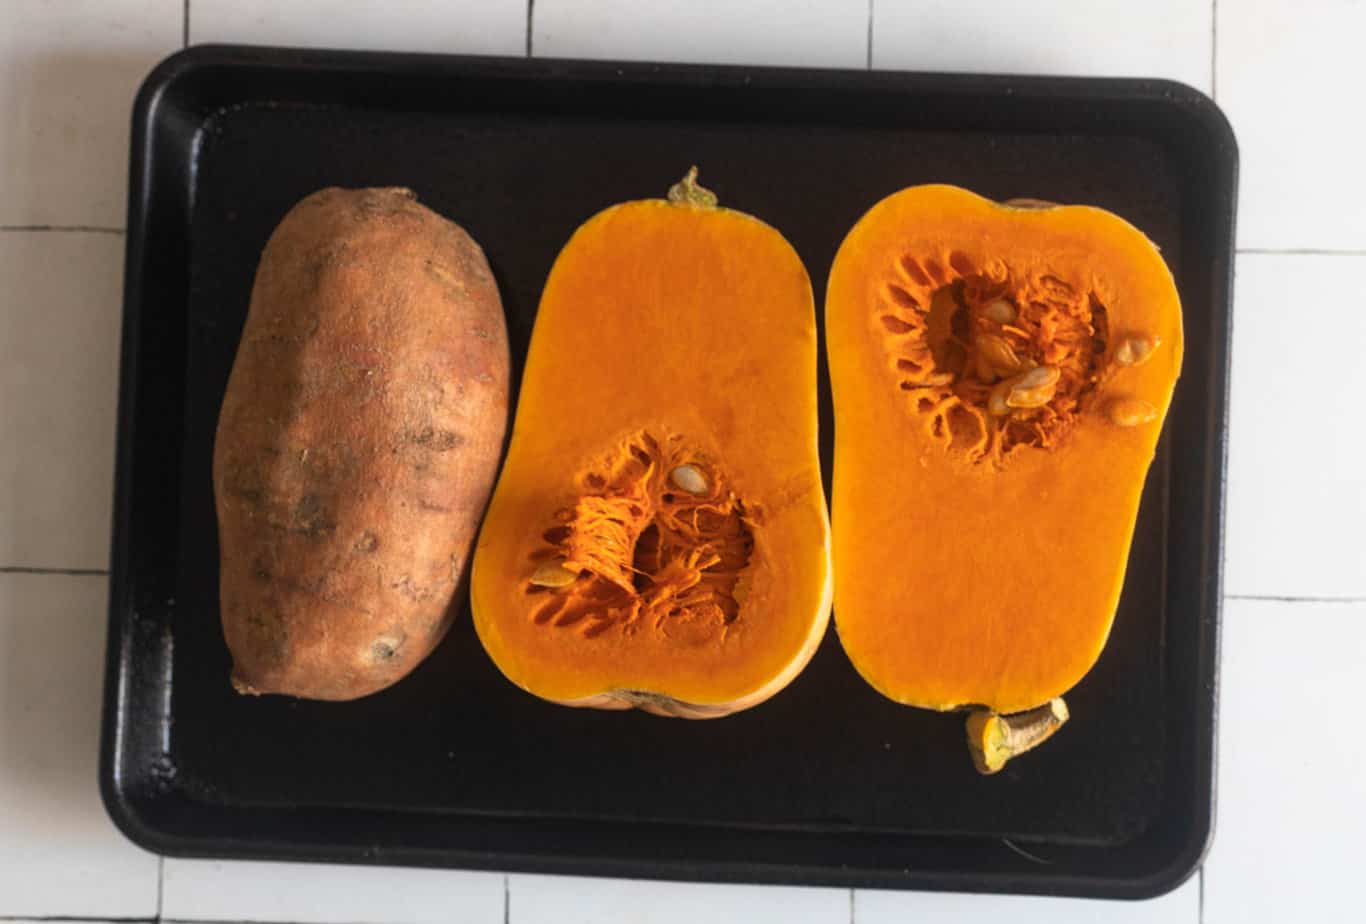 The sweet potato and butternut squash on a baking sheet before baking